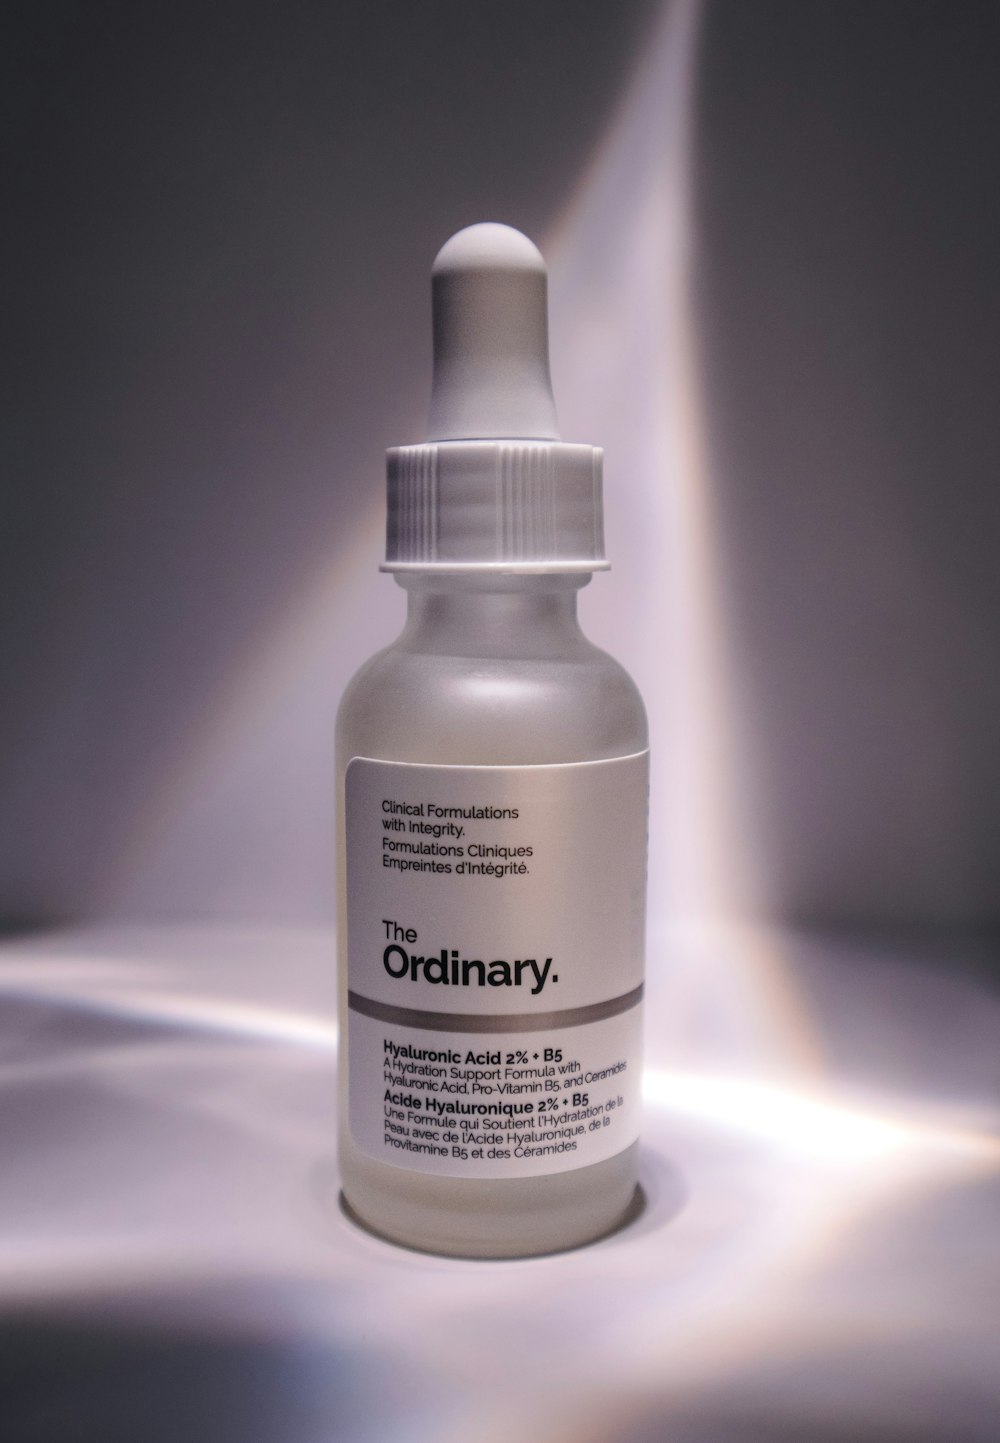 a bottle of the ordinary solution on a gray background